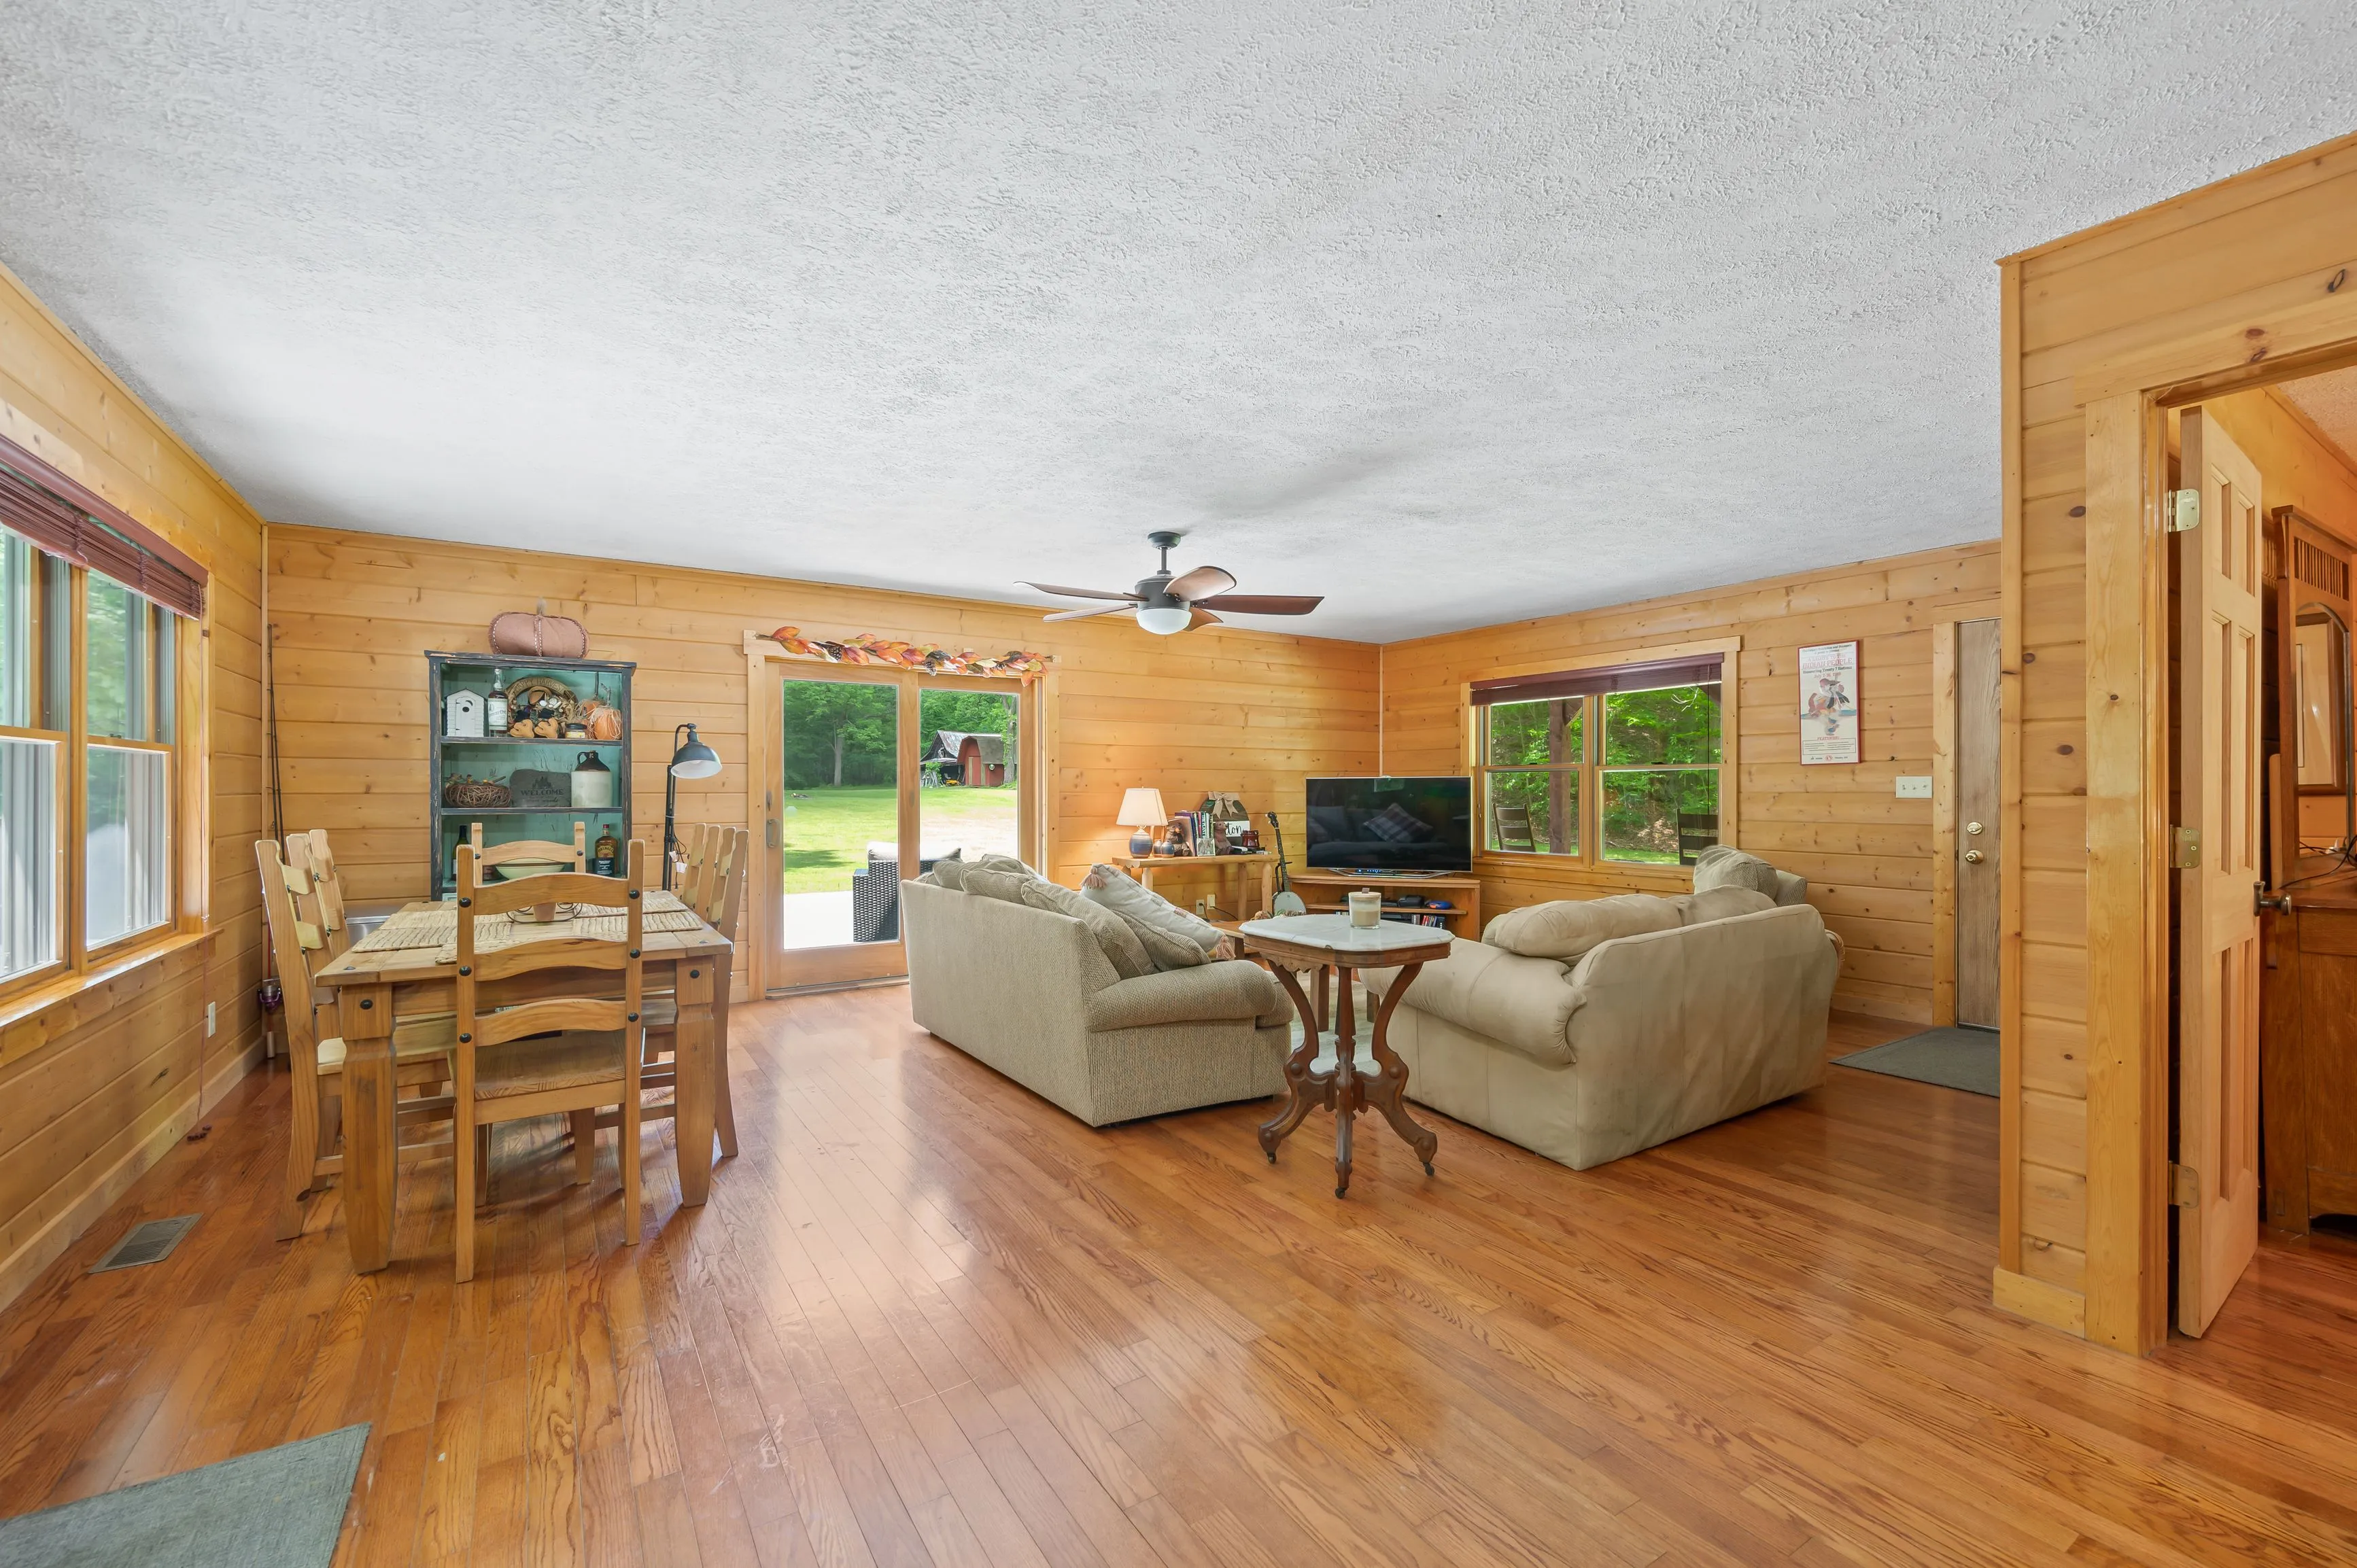 Wood-paneled living room with hardwood floors, comfortable seating, ceiling fan, and views of the yard through glass doors.